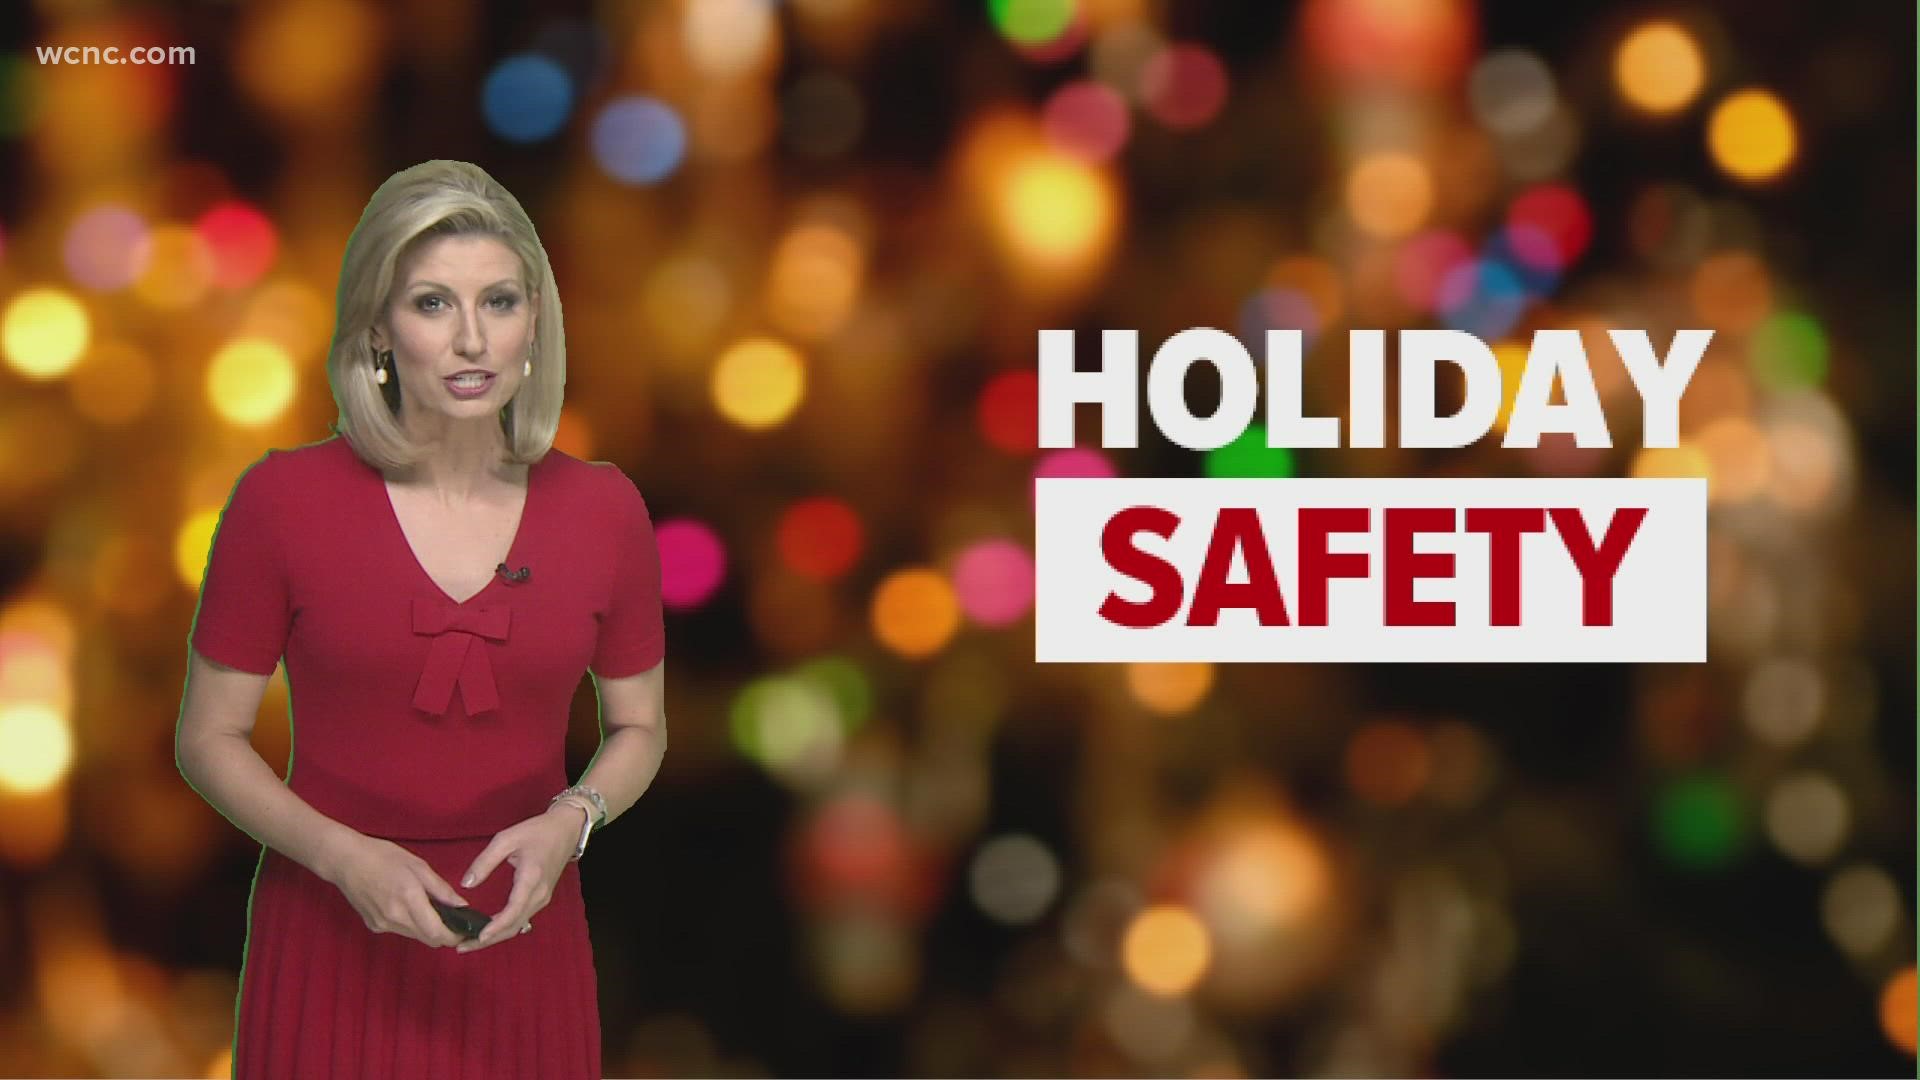 Decking the halls is supposed to be fun, but one slip can cause a serious situation. These tips can help you keep the spirit in a safe manner.